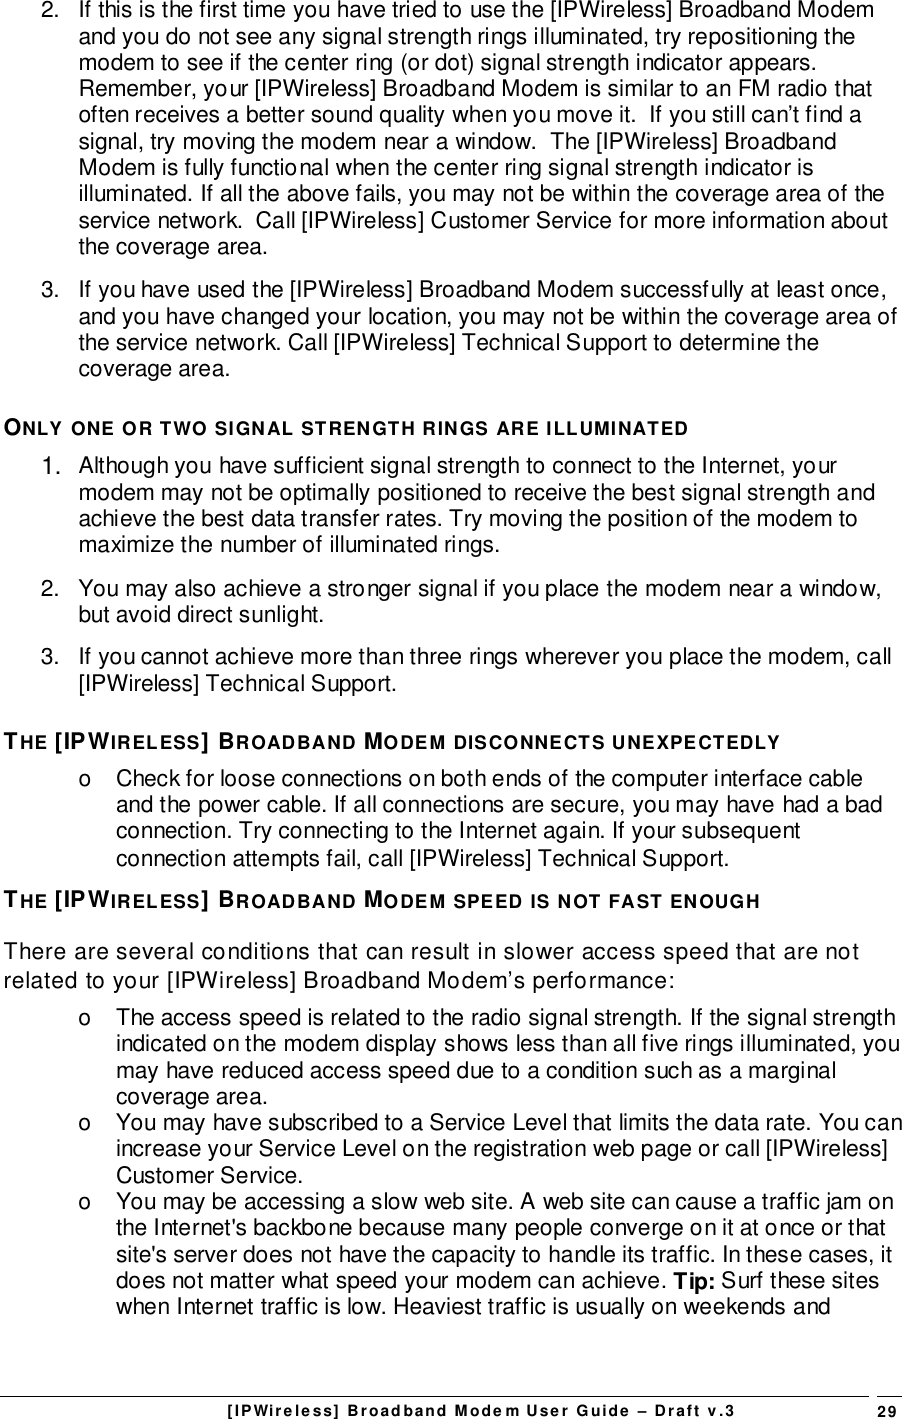 [IPWireless] Broadband Modem User Guide – Draft v.3 292.  If this is the first time you have tried to use the [IPWireless] Broadband Modemand you do not see any signal strength rings illuminated, try repositioning themodem to see if the center ring (or dot) signal strength indicator appears.Remember, your [IPWireless] Broadband Modem is similar to an FM radio thatoften receives a better sound quality when you move it.  If you still can’t find asignal, try moving the modem near a window.  The [IPWireless] BroadbandModem is fully functional when the center ring signal strength indicator isilluminated. If all the above fails, you may not be within the coverage area of theservice network.  Call [IPWireless] Customer Service for more information aboutthe coverage area.3.  If you have used the [IPWireless] Broadband Modem successfully at least once,and you have changed your location, you may not be within the coverage area ofthe service network. Call [IPWireless] Technical Support to determine thecoverage area.ONLY ONE OR TWO SIGNAL STRENGTH RINGS ARE ILLUMINATED1.  Although you have sufficient signal strength to connect to the Internet, yourmodem may not be optimally positioned to receive the best signal strength andachieve the best data transfer rates. Try moving the position of the modem tomaximize the number of illuminated rings.2.  You may also achieve a stronger signal if you place the modem near a window,but avoid direct sunlight.3.  If you cannot achieve more than three rings wherever you place the modem, call[IPWireless] Technical Support.THE [IPWIRELESS] BROADBAND MODEM DISCONNECTS UNEXPECTEDLYo  Check for loose connections on both ends of the computer interface cableand the power cable. If all connections are secure, you may have had a badconnection. Try connecting to the Internet again. If your subsequentconnection attempts fail, call [IPWireless] Technical Support.THE [IPWIRELESS] BROADBAND MODEM SPEED IS NOT FAST ENOUGHThere are several conditions that can result in slower access speed that are notrelated to your [IPWireless] Broadband Modem’s performance:o  The access speed is related to the radio signal strength. If the signal strengthindicated on the modem display shows less than all five rings illuminated, youmay have reduced access speed due to a condition such as a marginalcoverage area.o  You may have subscribed to a Service Level that limits the data rate. You canincrease your Service Level on the registration web page or call [IPWireless]Customer Service.o  You may be accessing a slow web site. A web site can cause a traffic jam onthe Internet&apos;s backbone because many people converge on it at once or thatsite&apos;s server does not have the capacity to handle its traffic. In these cases, itdoes not matter what speed your modem can achieve. Tip: Surf these siteswhen Internet traffic is low. Heaviest traffic is usually on weekends and